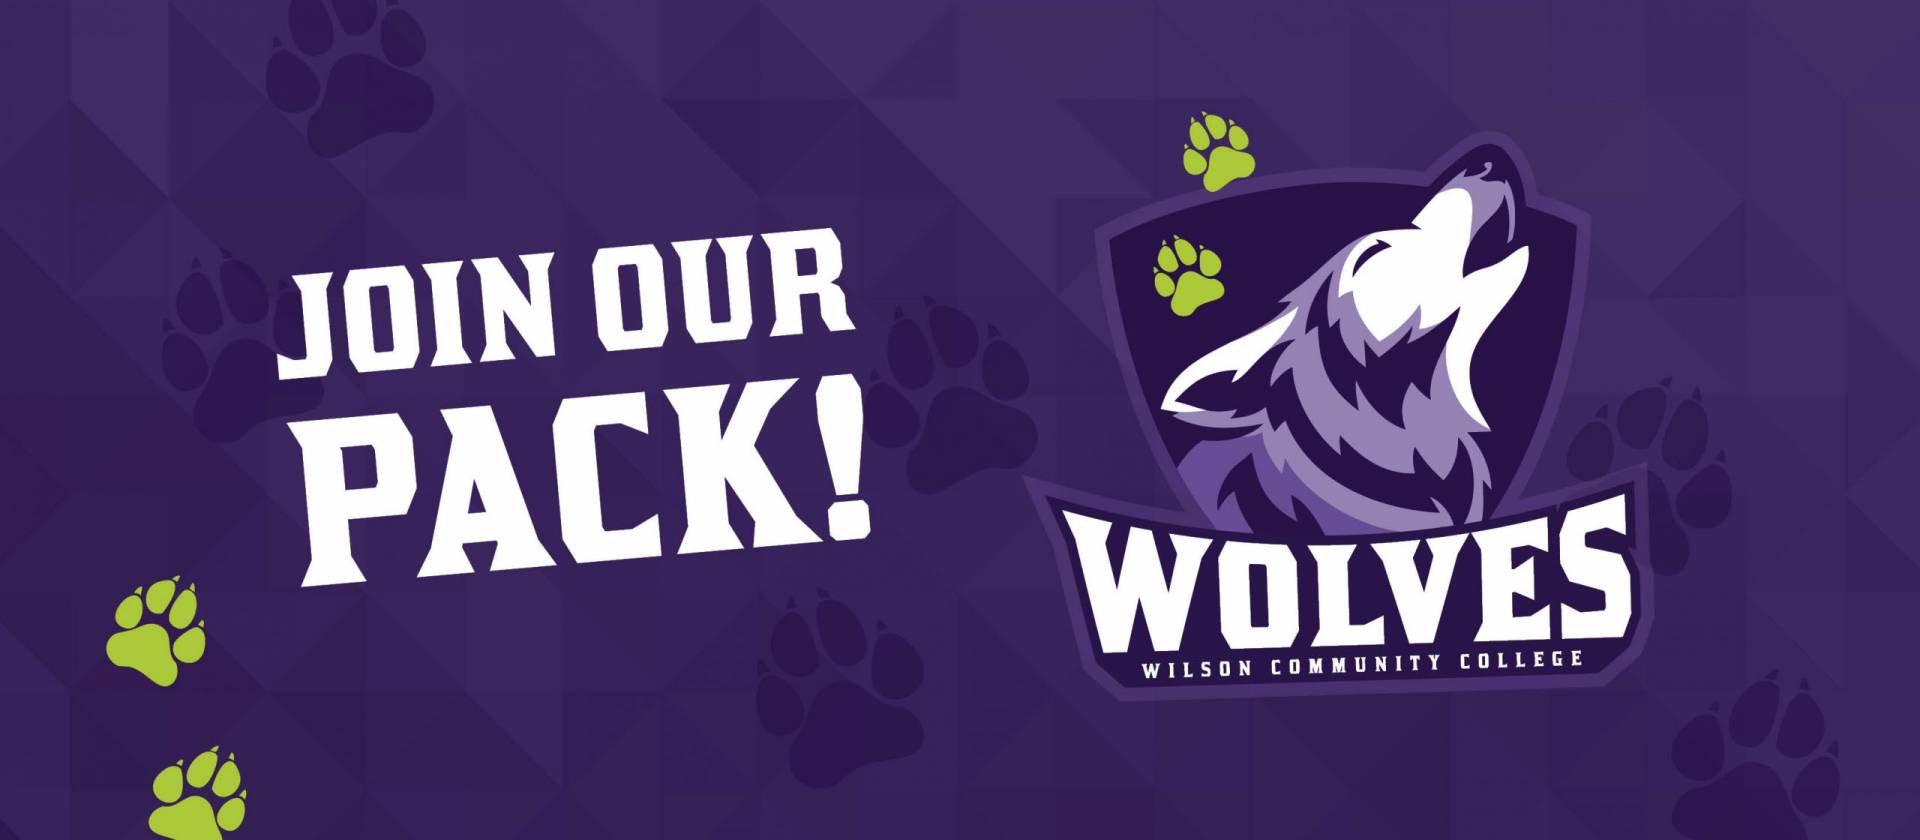 Join Our Pack! Wilson Community College Wolves